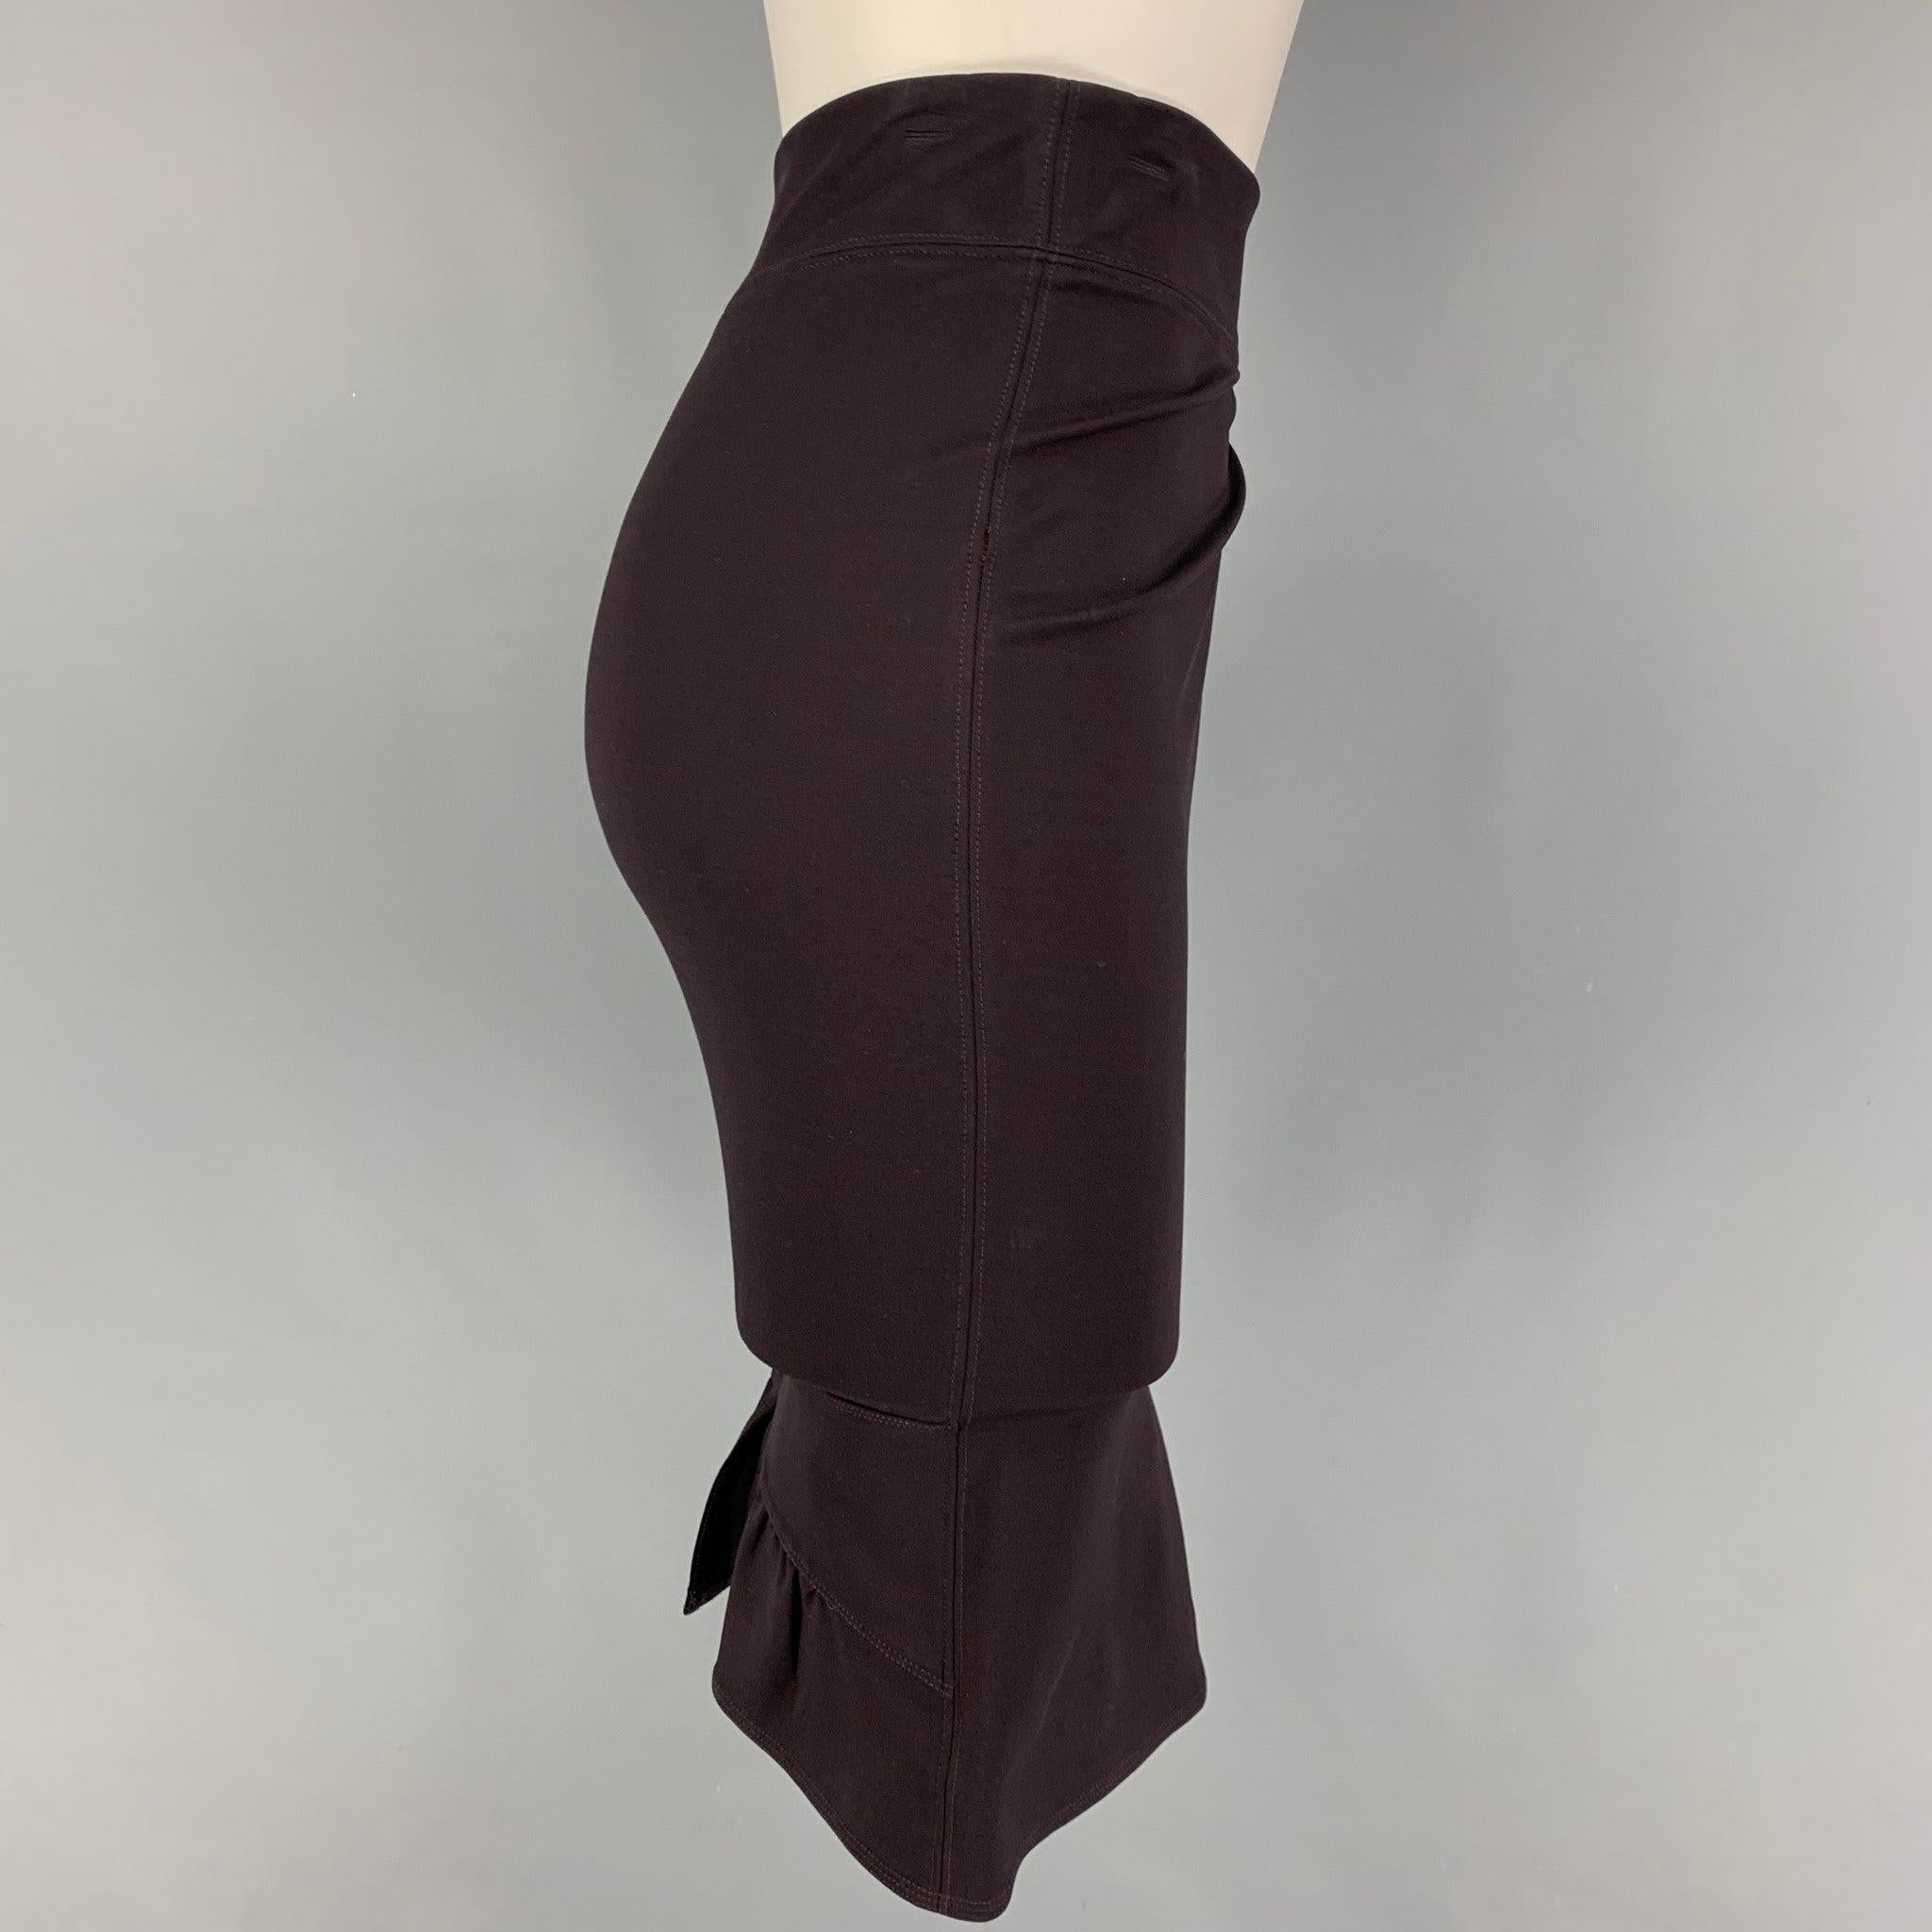 GUCCI skirt comes in a eggplant viscose blend featuring a back ruffle design, small back slit, and a side zipper closure. Made in Italy.
Very Good
Pre-Owned Condition. 

Marked:   M  

Measurements: 
  Waist: 29 inches  Hip:
33 inches  Length: 23